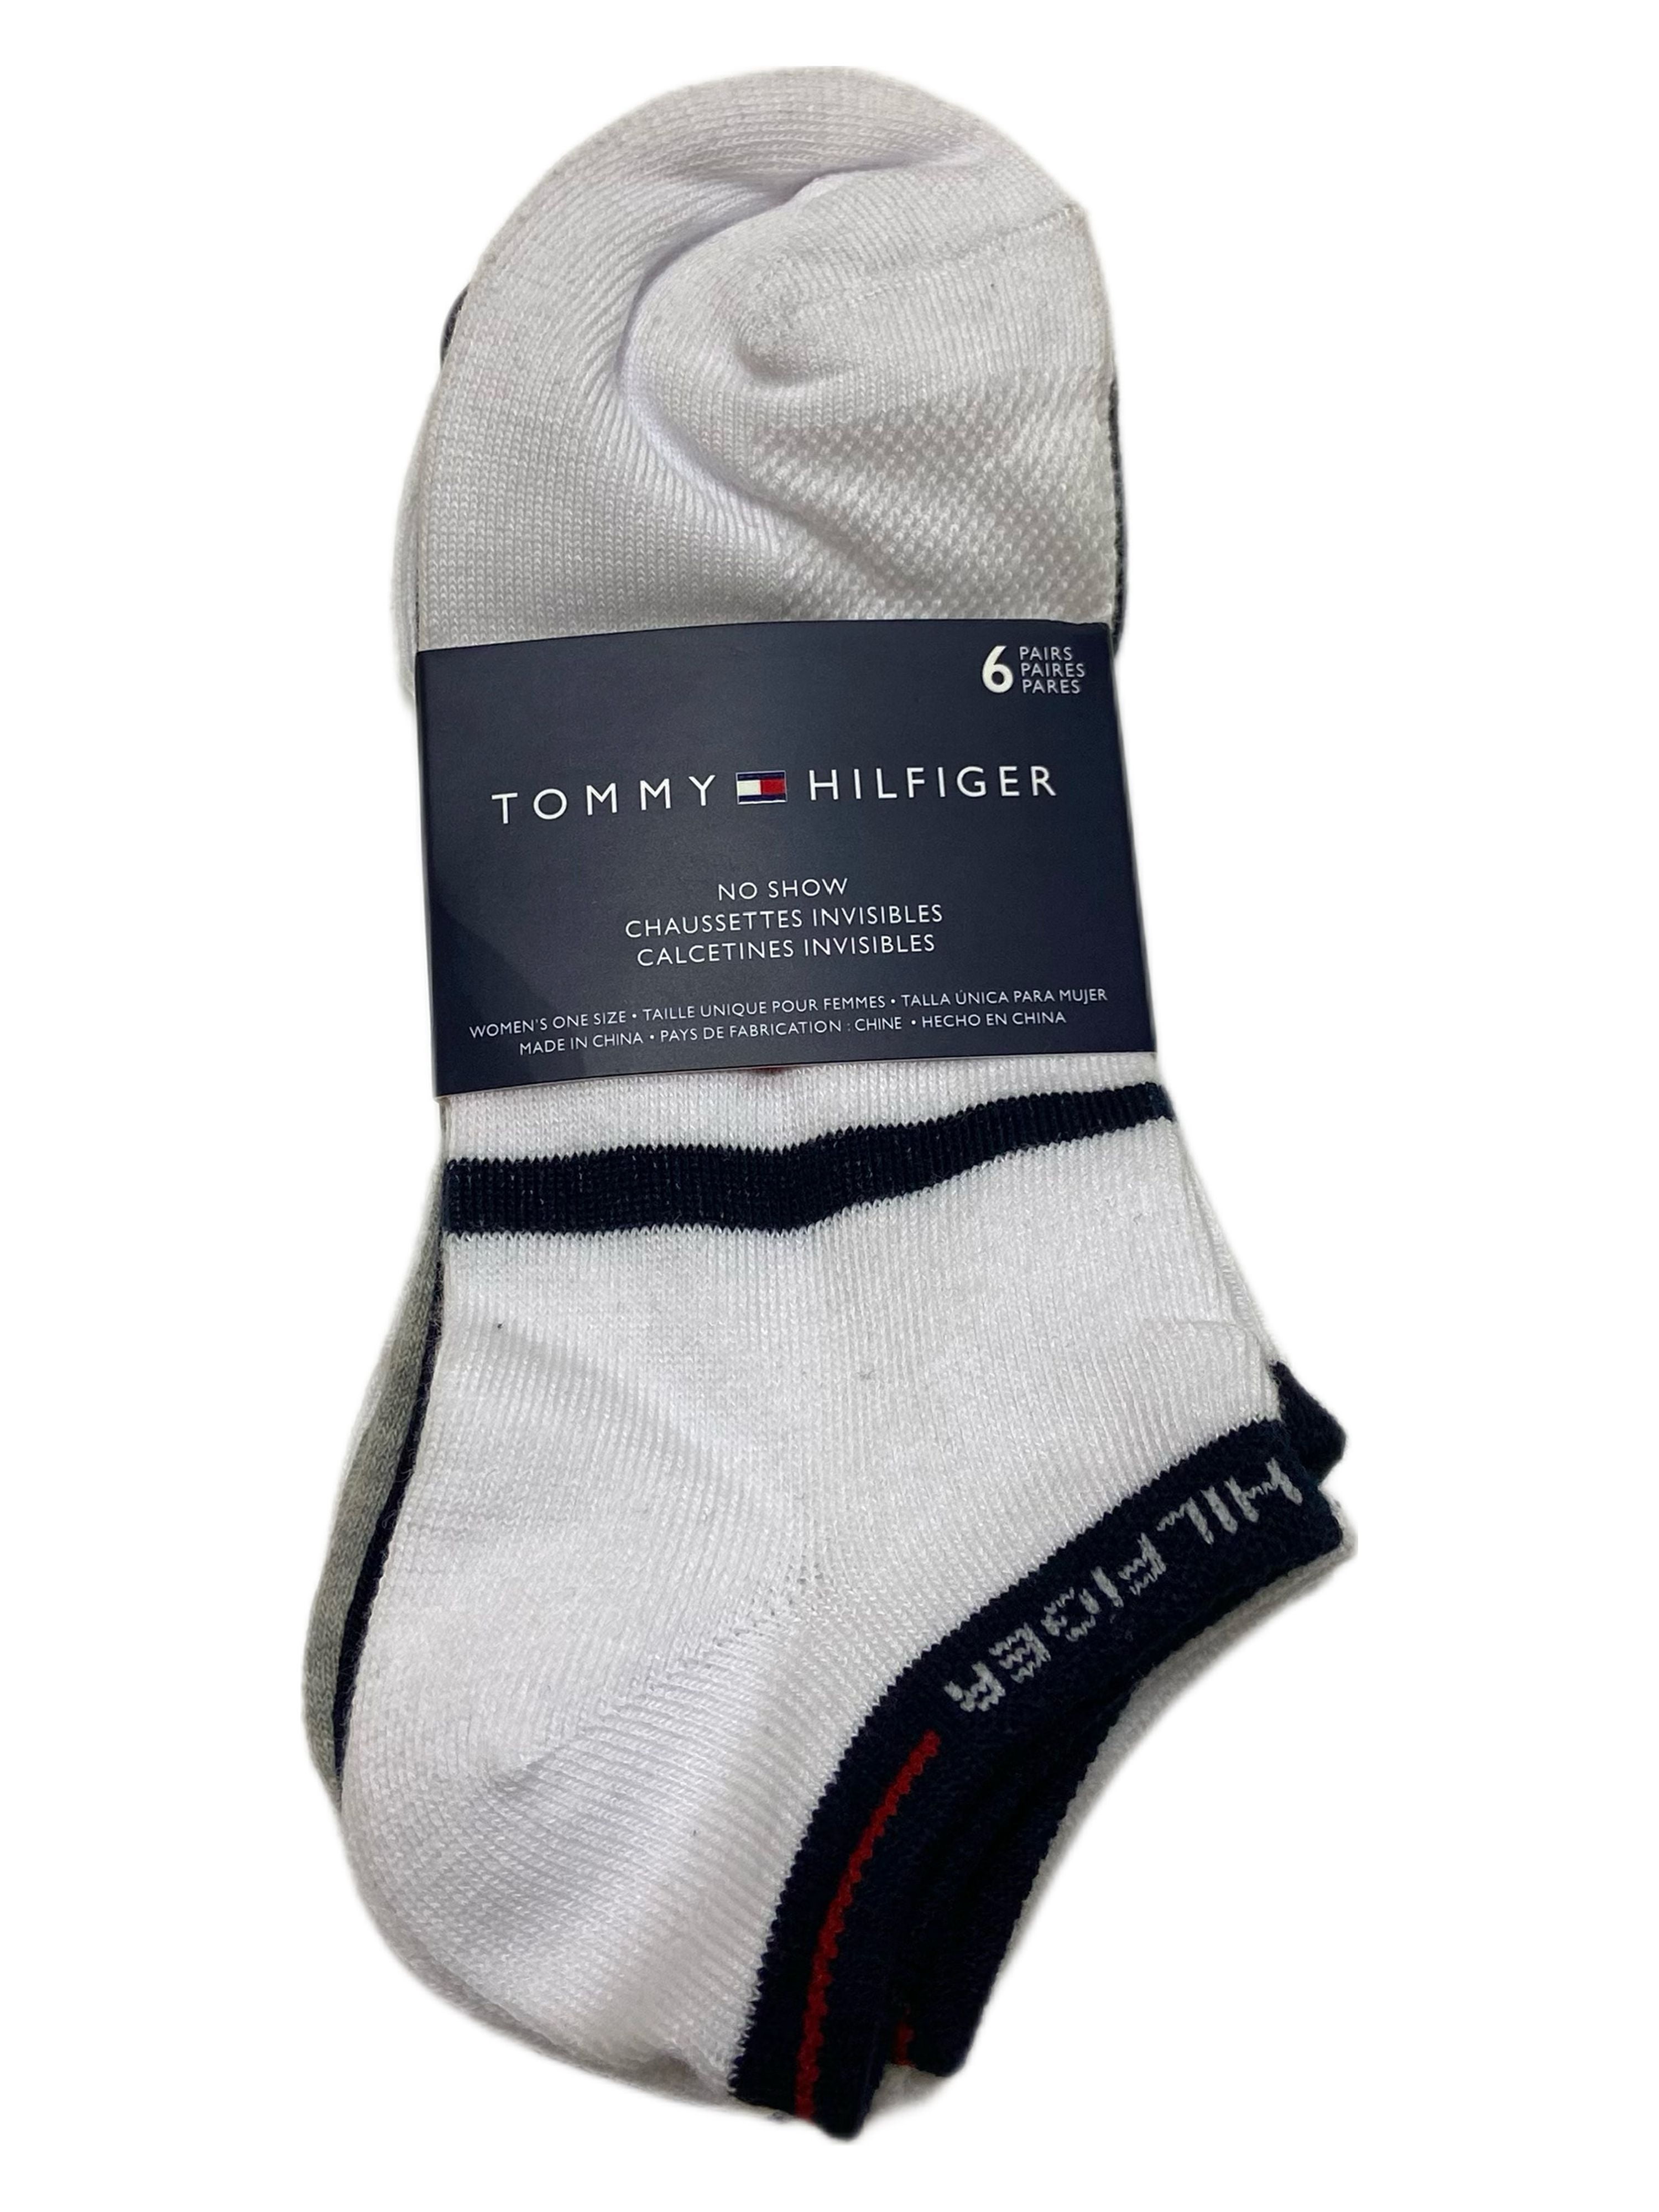 TOMMY HILFIGER Women's 6 Pairs Extra Low Cut Socks, Multicolor, 6-9.5 